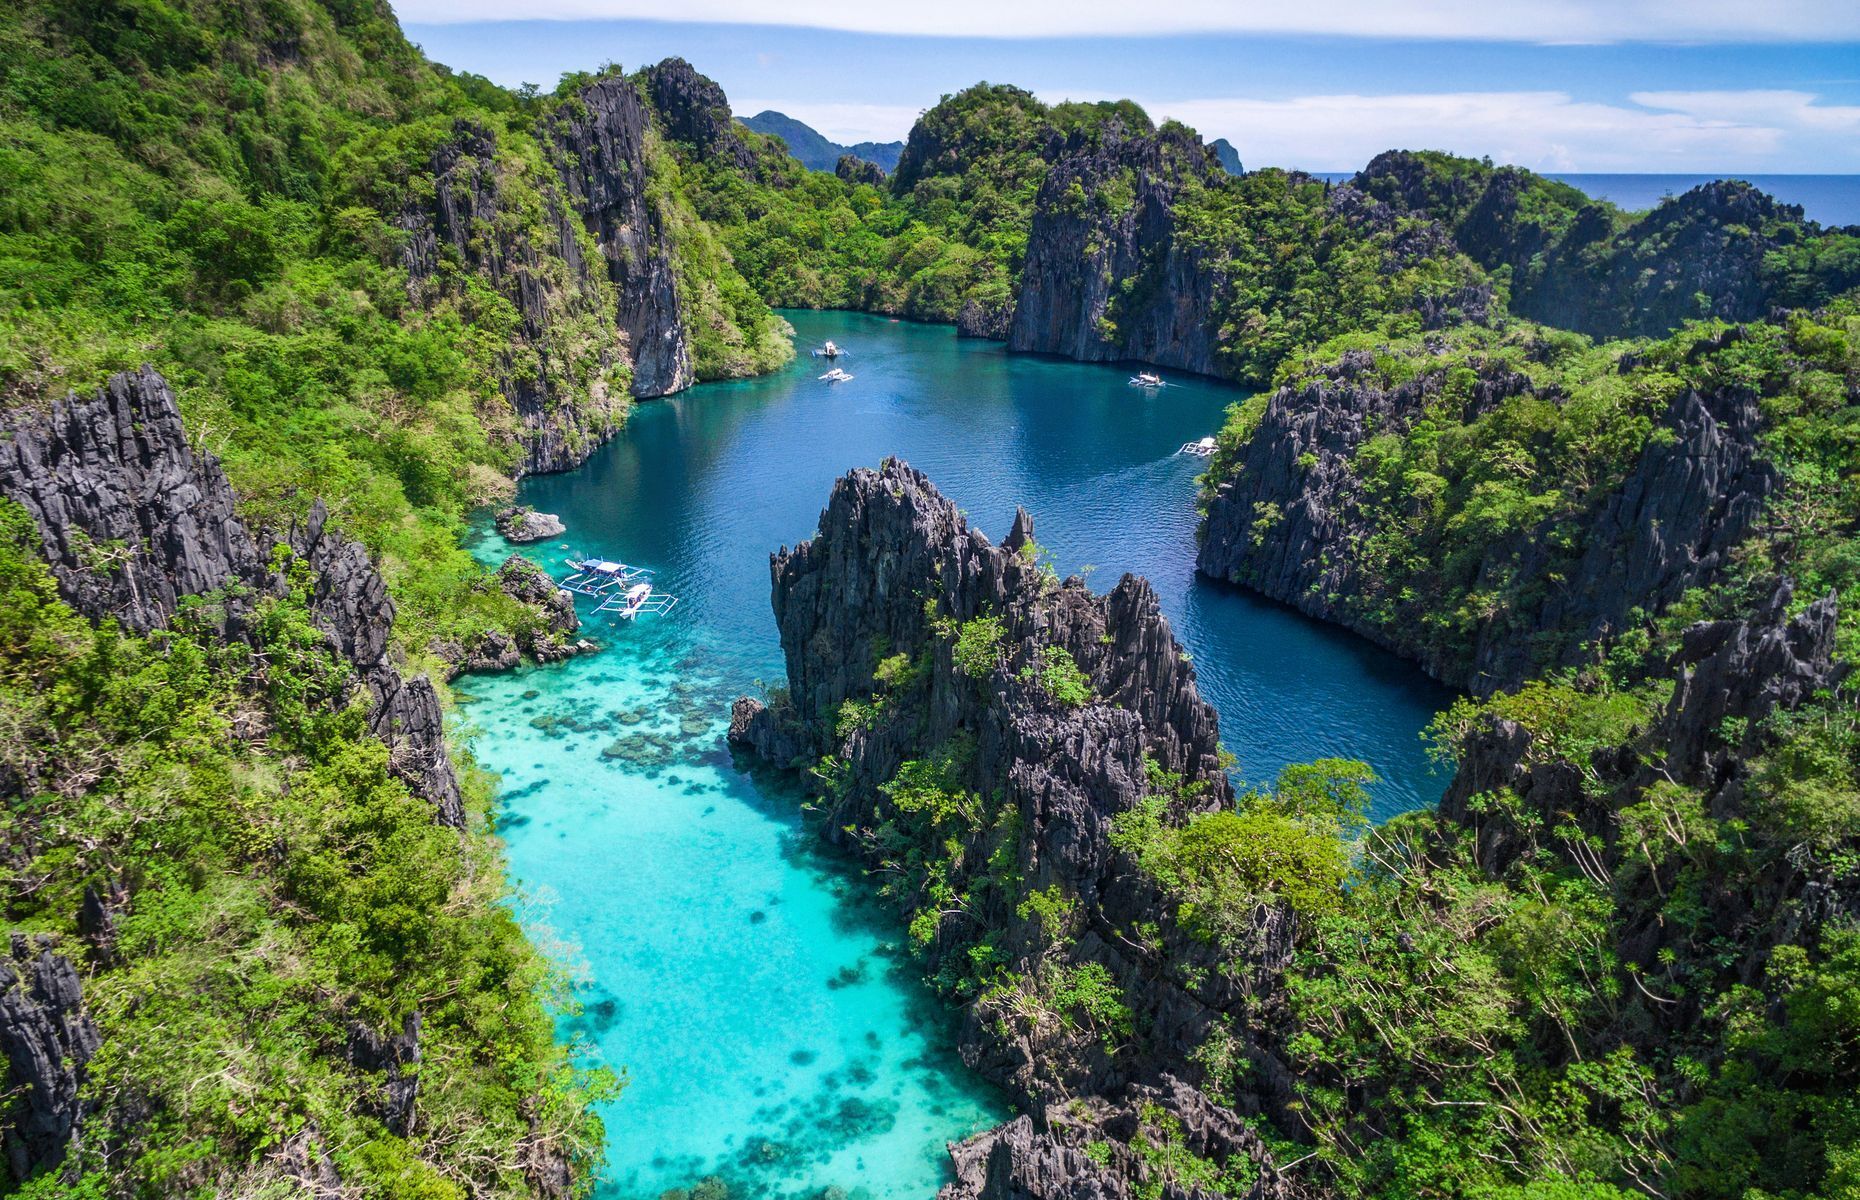 <p>Visitors to <a href="https://www.elnidotourism.com/" class="atom_link atom_valid" rel="noreferrer noopener">El Nido</a>, in the Philippines’ Palawan archipelago, will find its heavenly beaches the stuff of dreams. Impressive limestone karsts populate blue-green waters in stunning seascapes. Don’t hesitate to book a boat trip to discover hidden lagoons, white-sand beaches, and abundant coral reefs, perfect for snorkelling and scuba diving.</p>